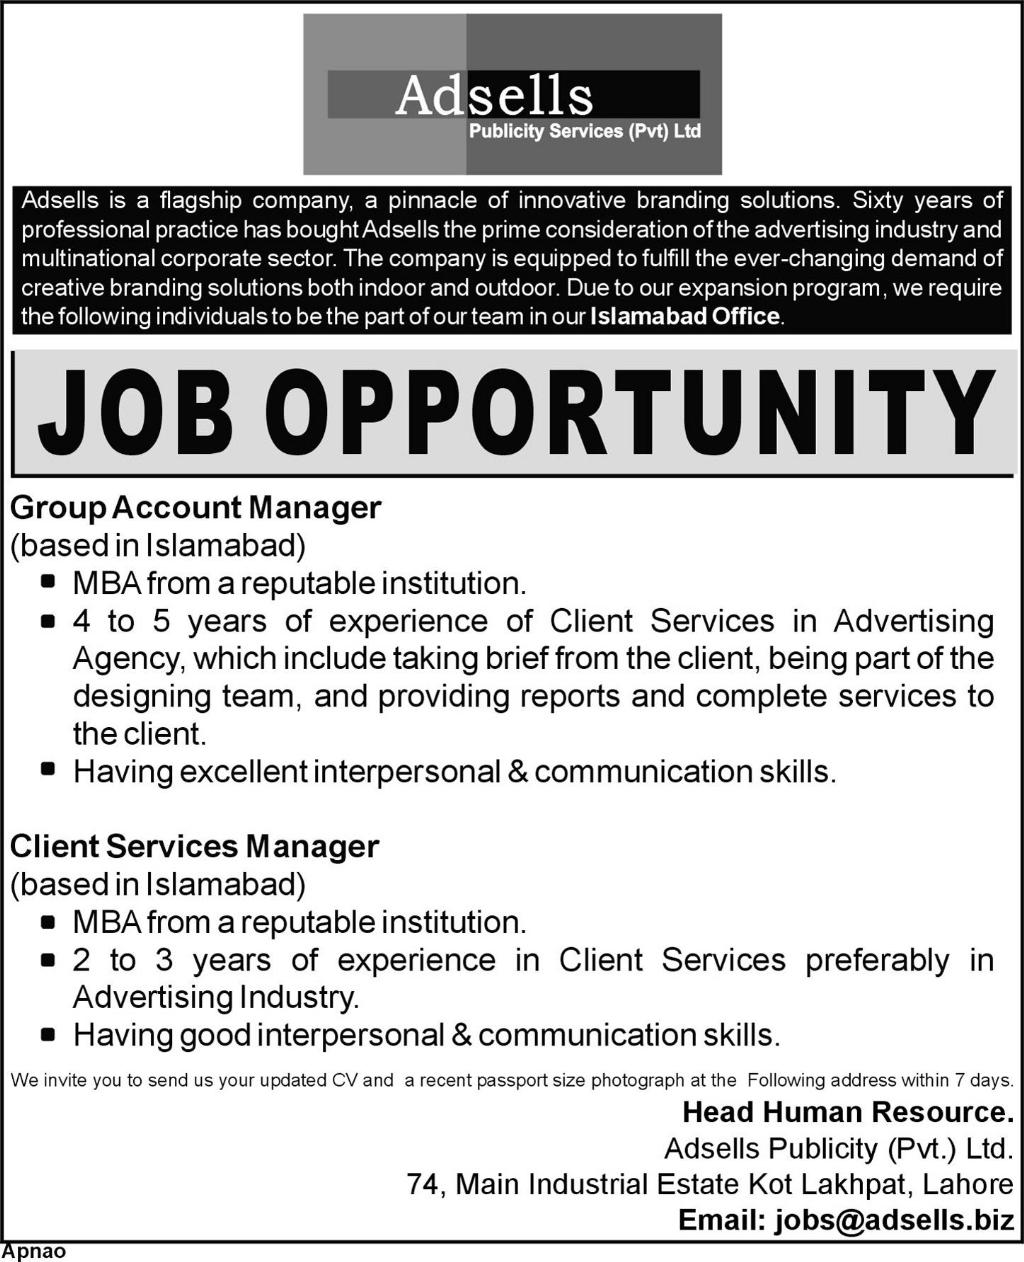 Adsells Publicity Services Pvt Ltd Required Managers